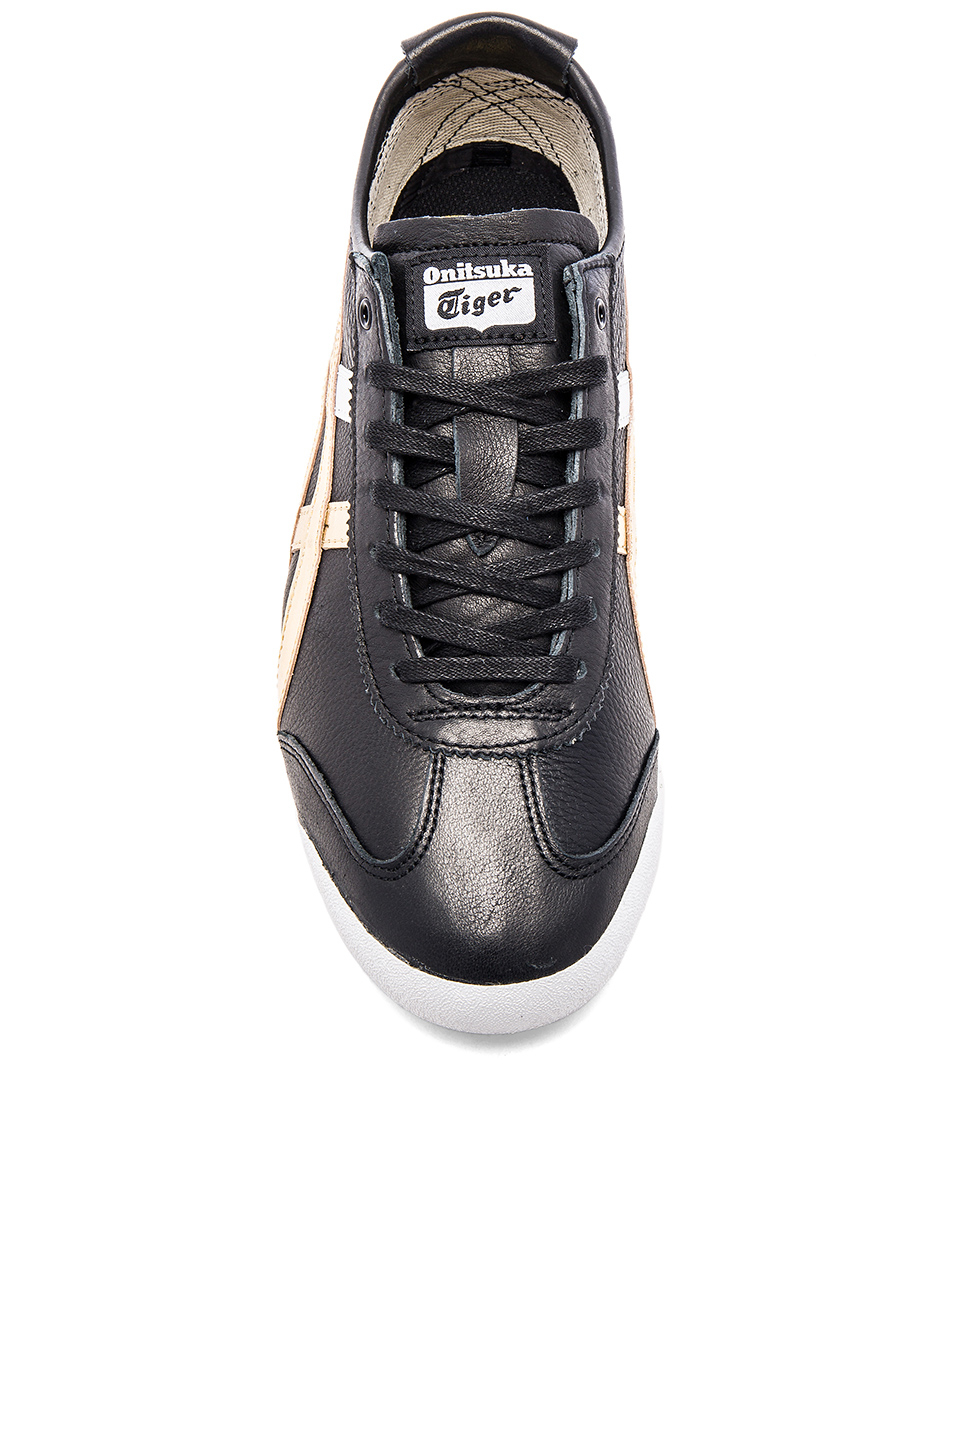 Onitsuka Tiger Leather Mexico 66 in Black Gold (Natural) - Lyst